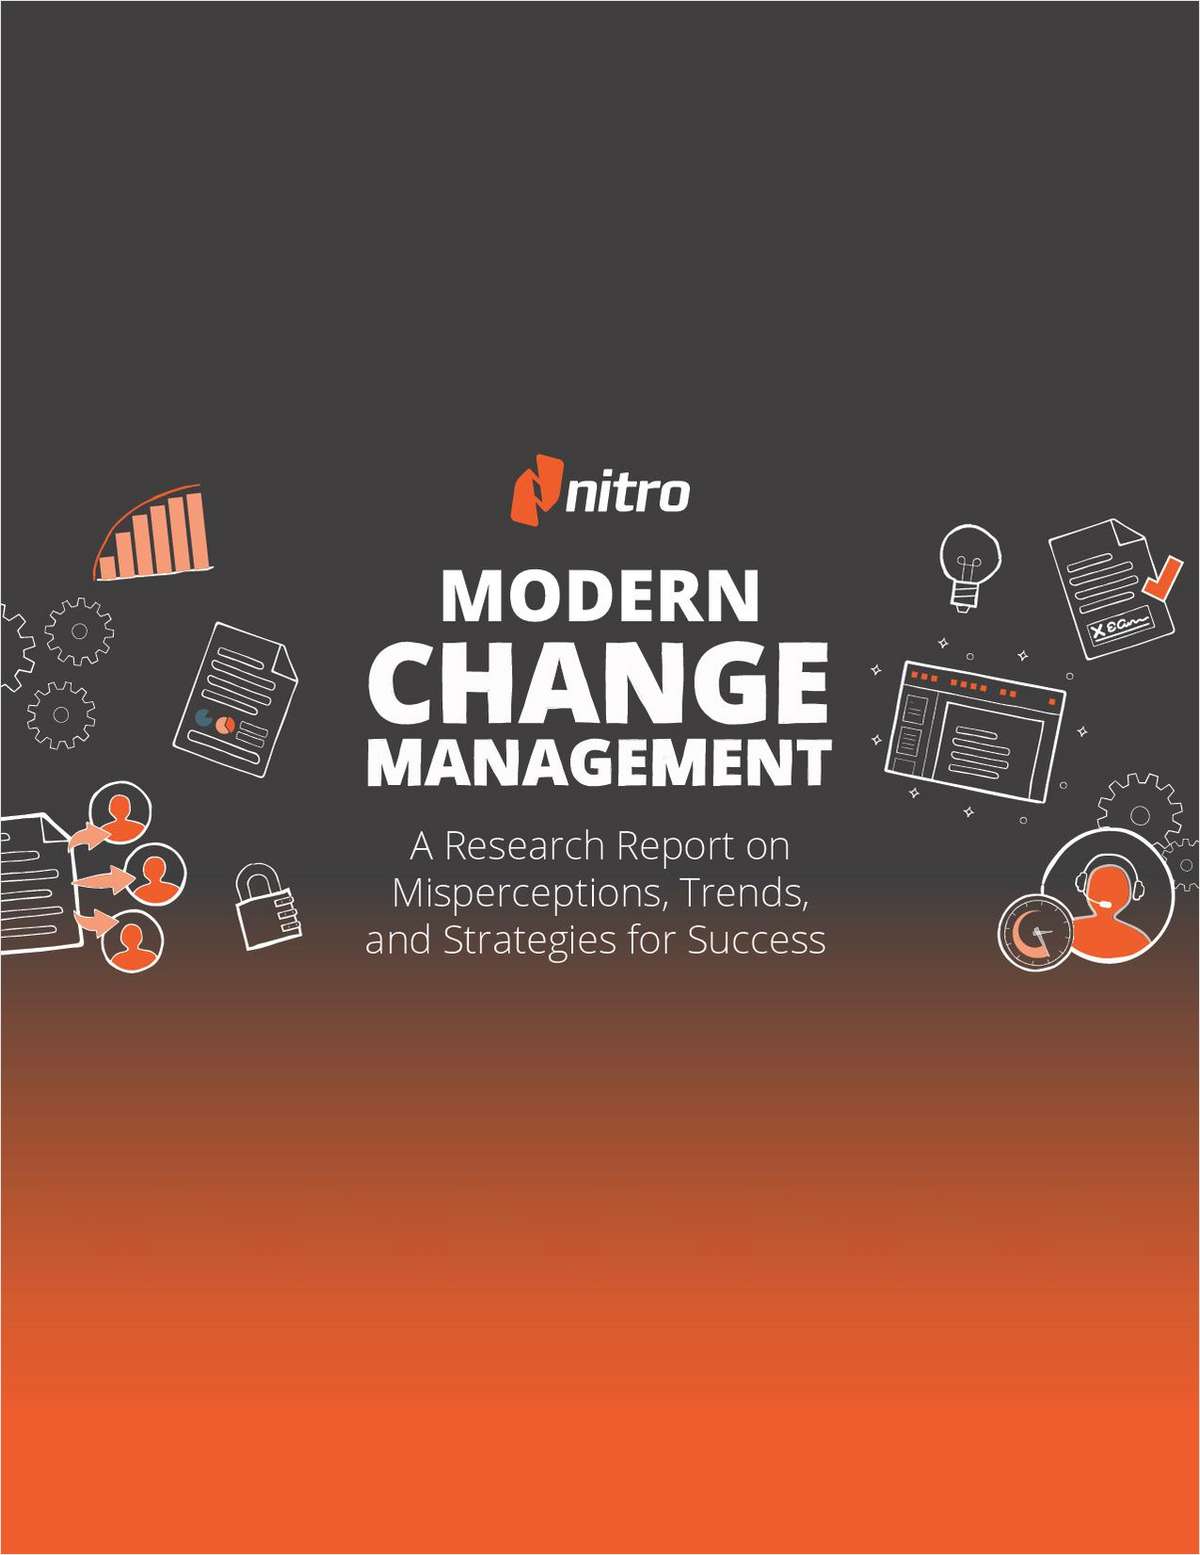 Modern Change Management: A Research Report on Misperceptions, Trends, and Strategies for Success